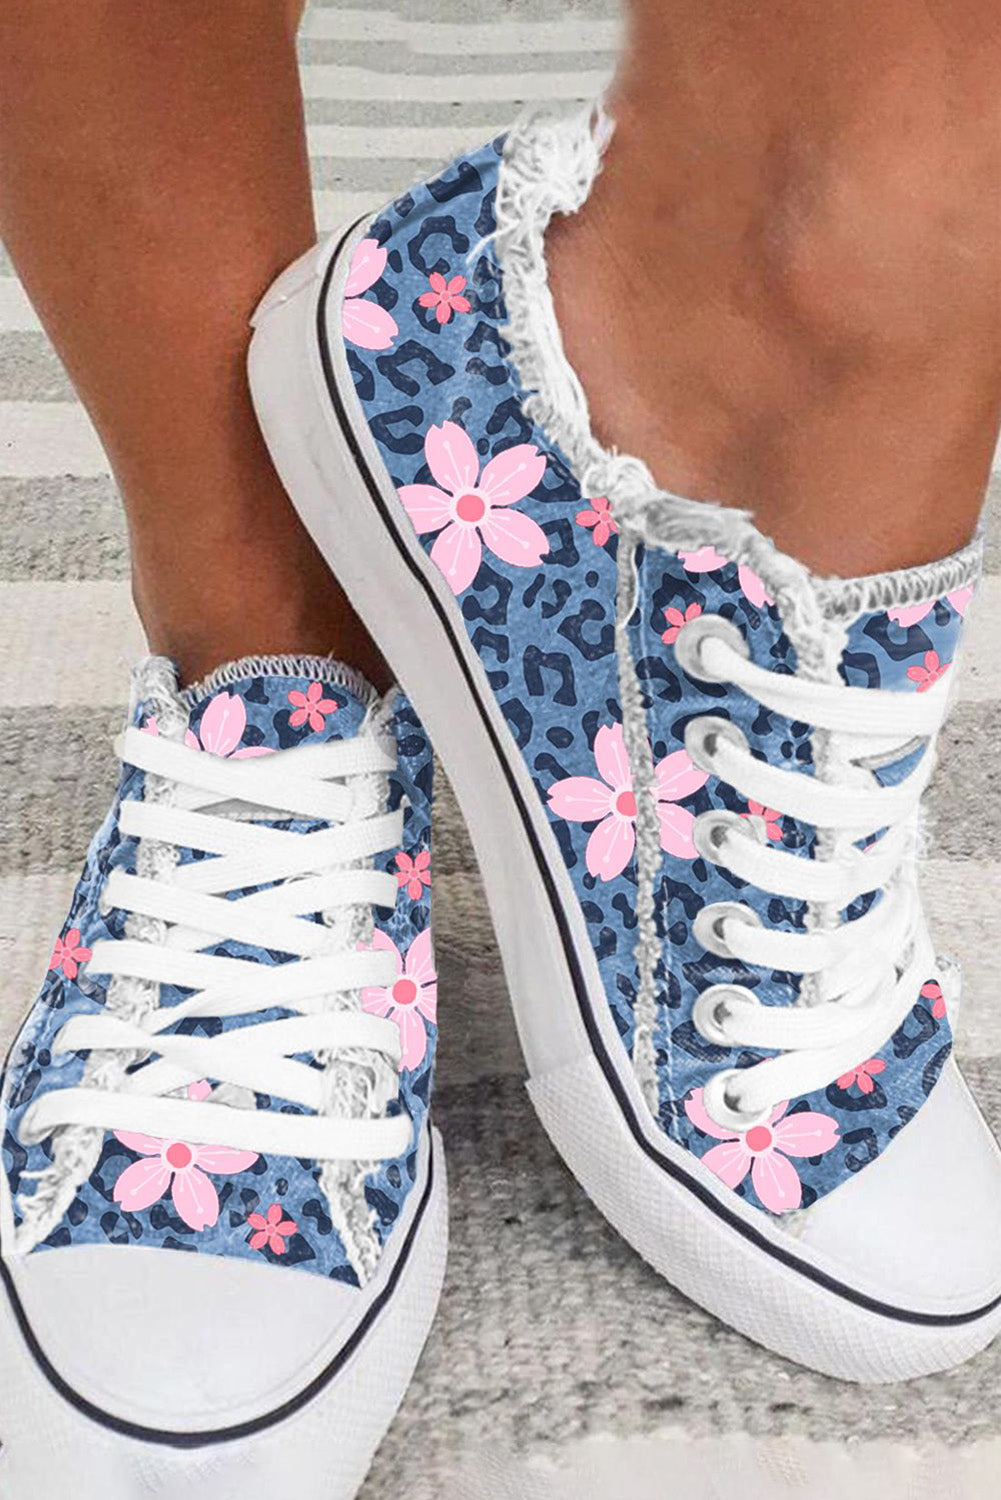 Leopard Cherry Blossom Canvas Shoes $ 26.99 - Evaless